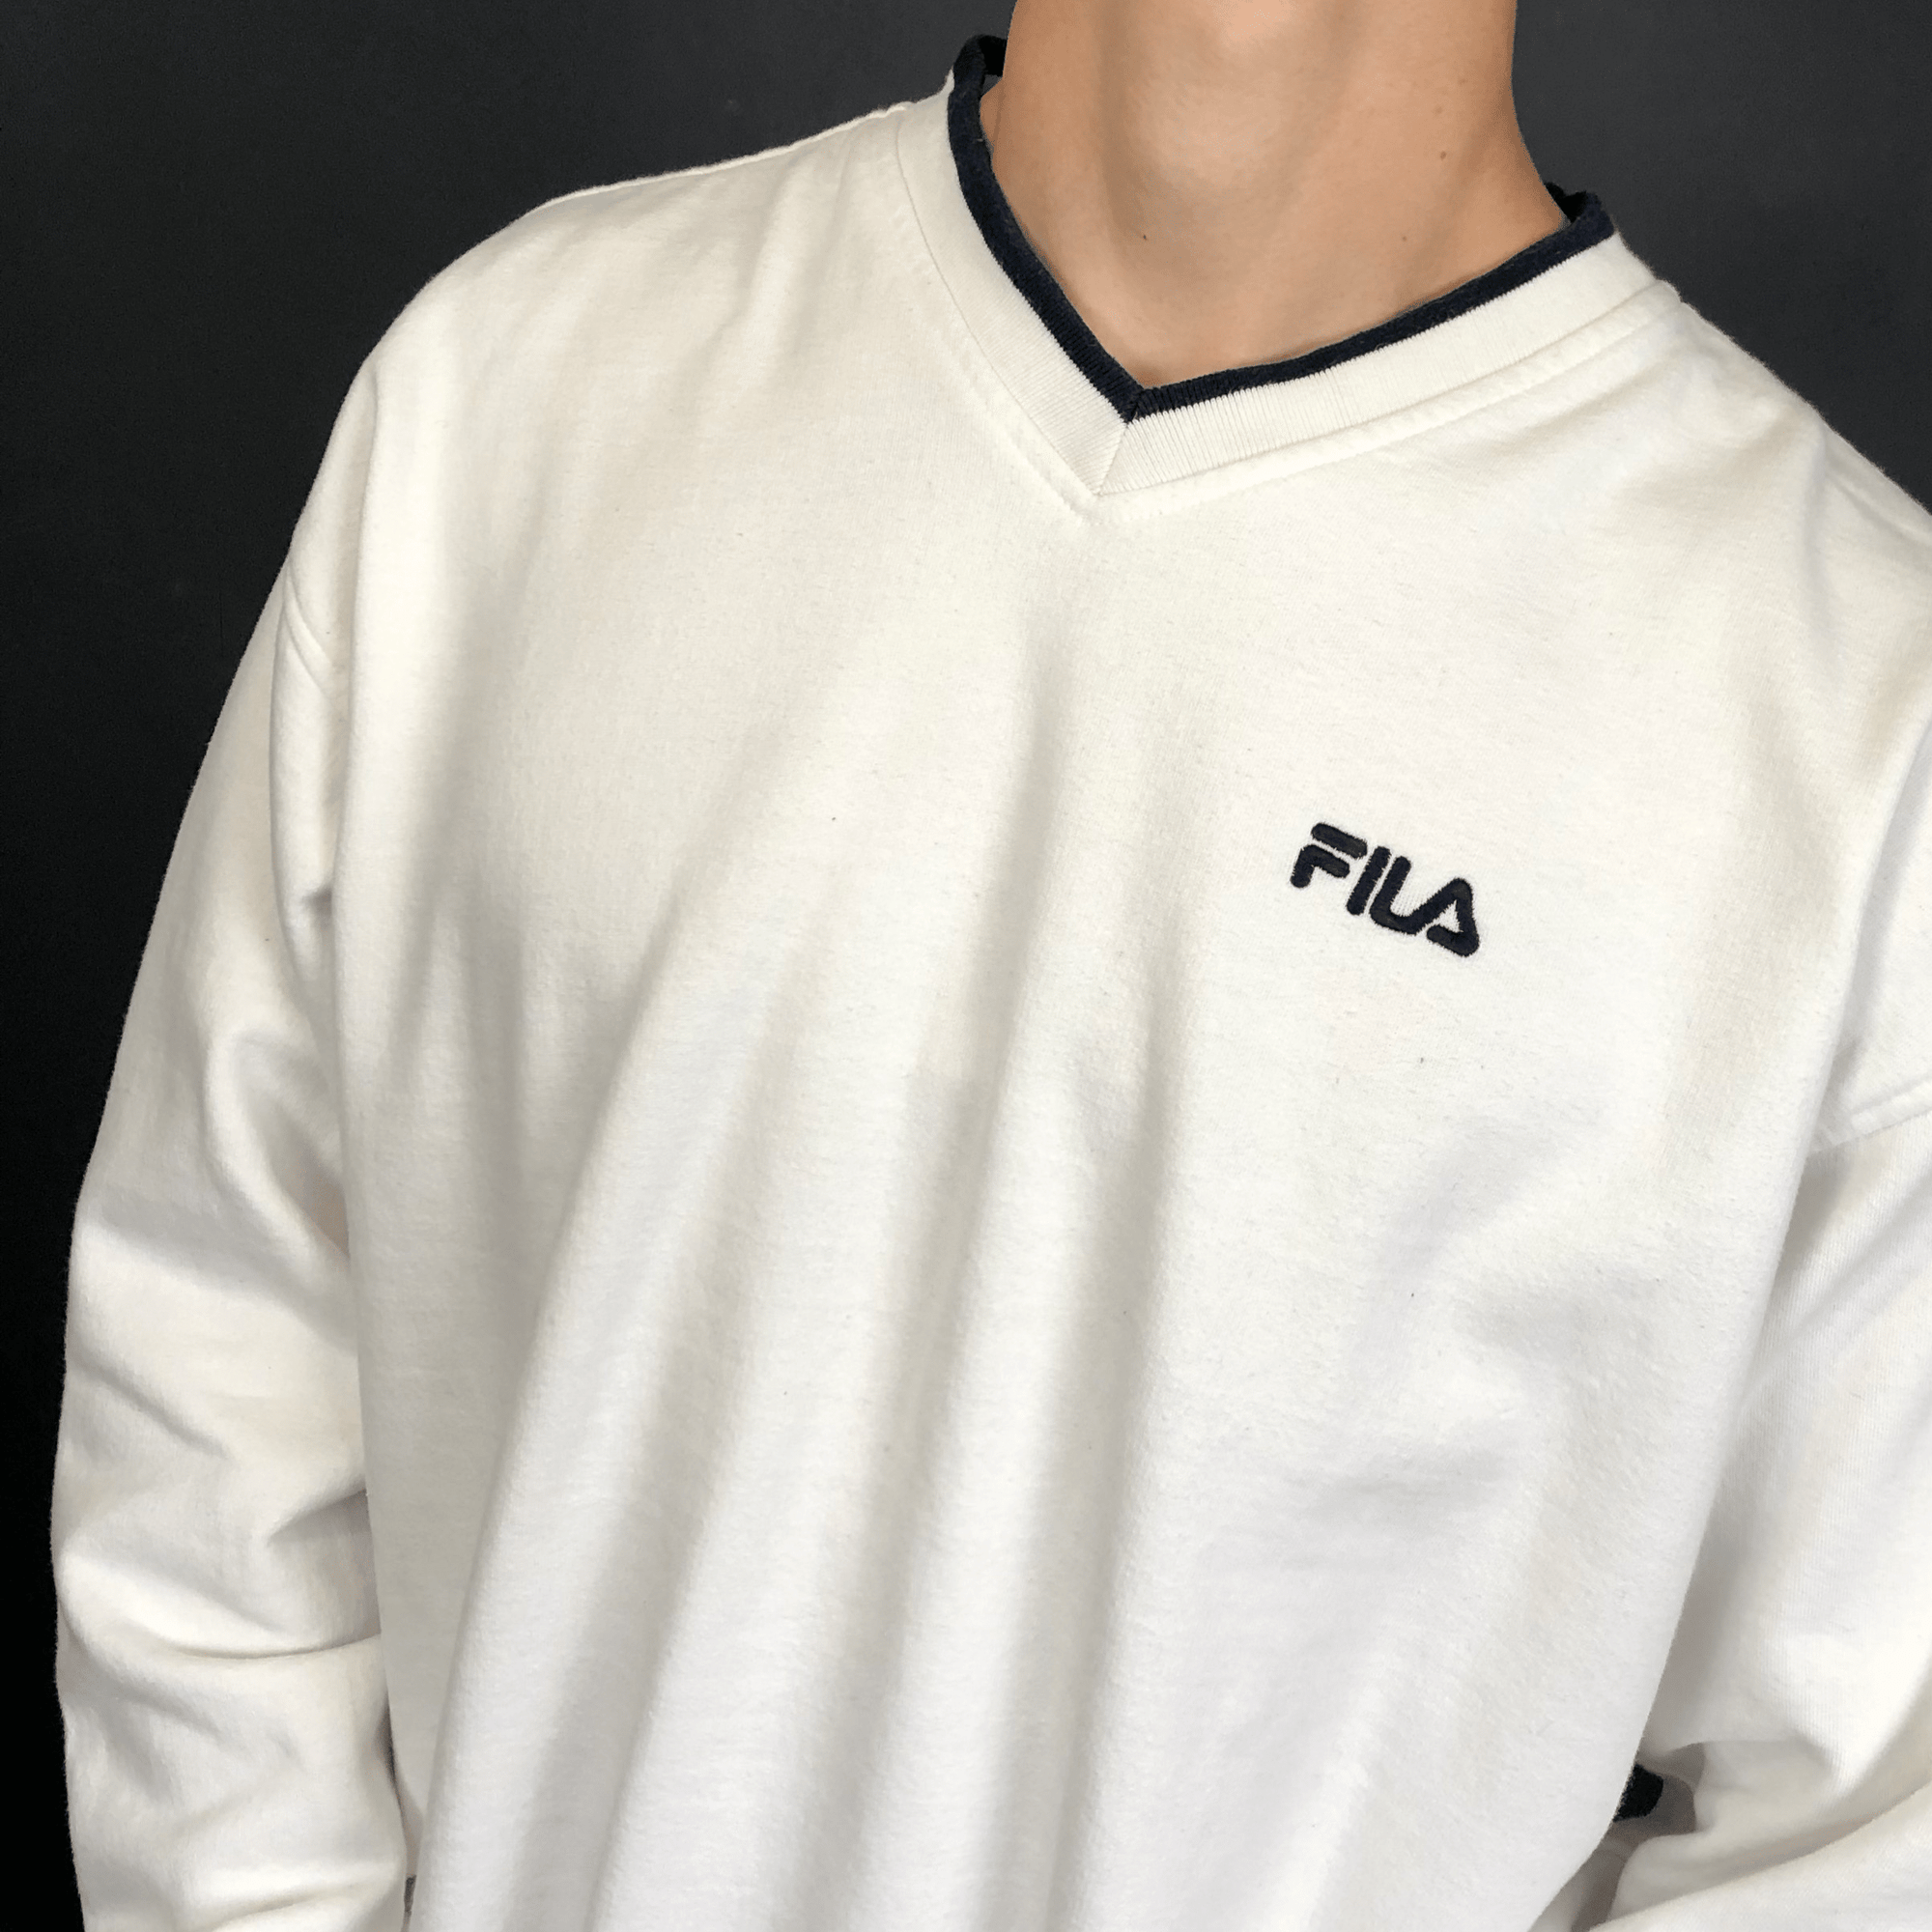 Vintage Fila Spellout Sweatshirt in White - Large - Vintique Clothing